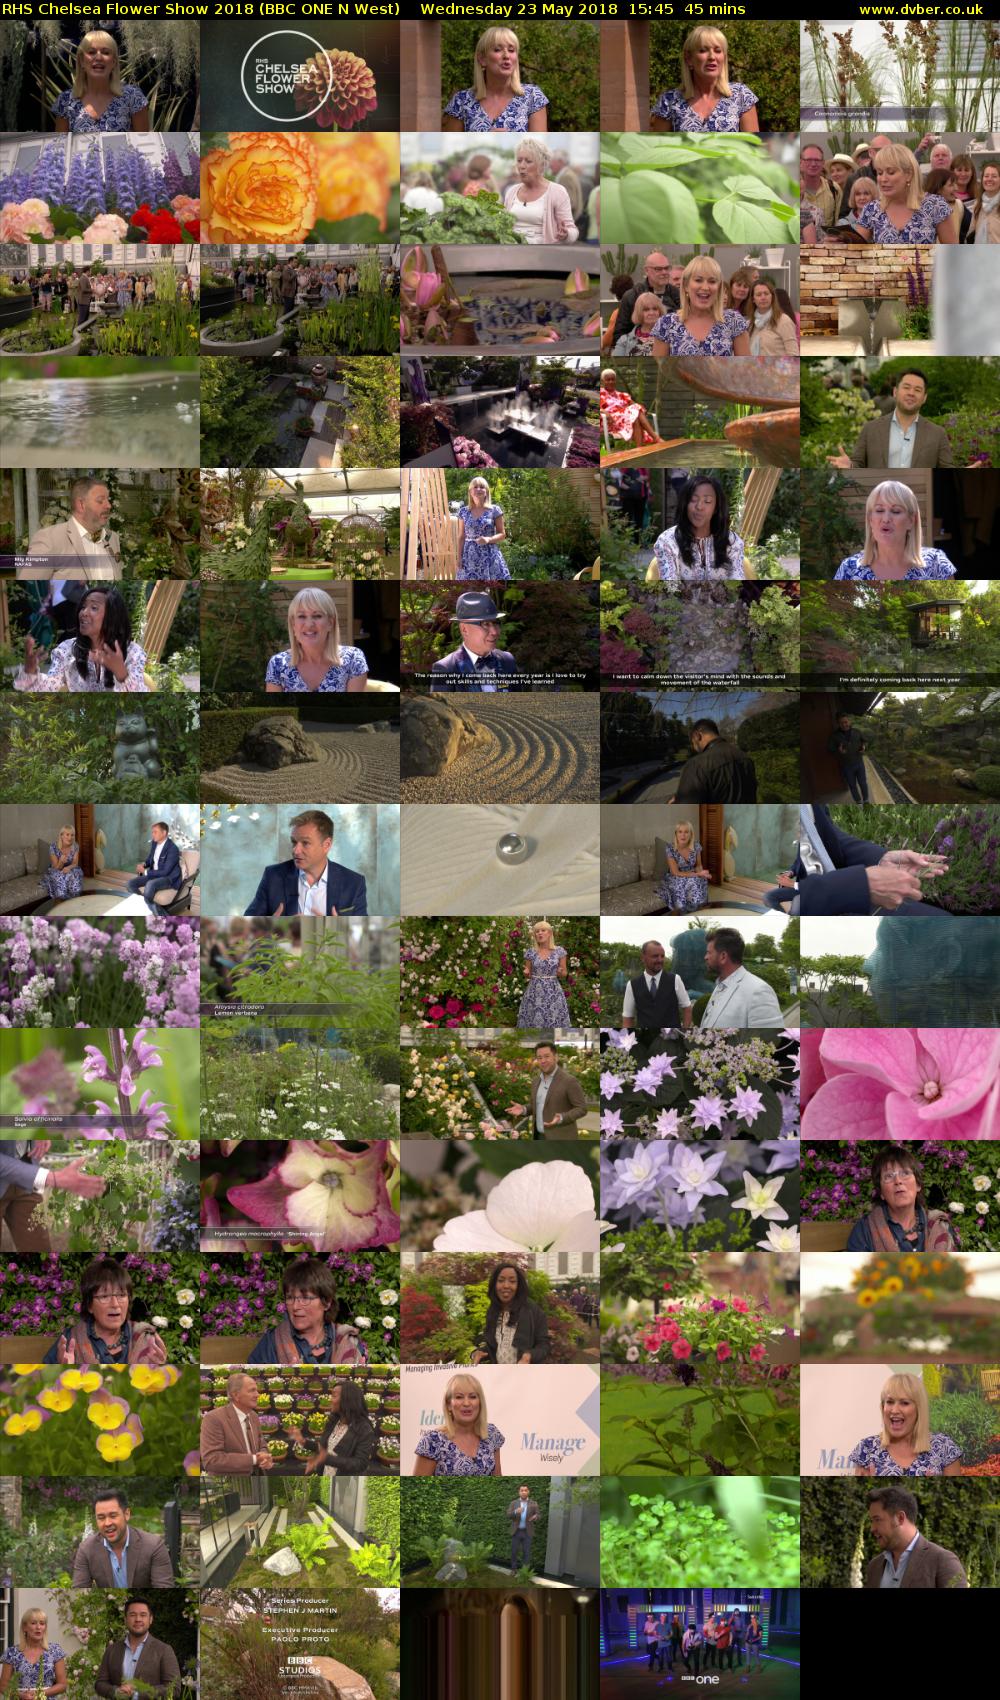 RHS Chelsea Flower Show 2018 (BBC ONE N West) Wednesday 23 May 2018 15:45 - 16:30